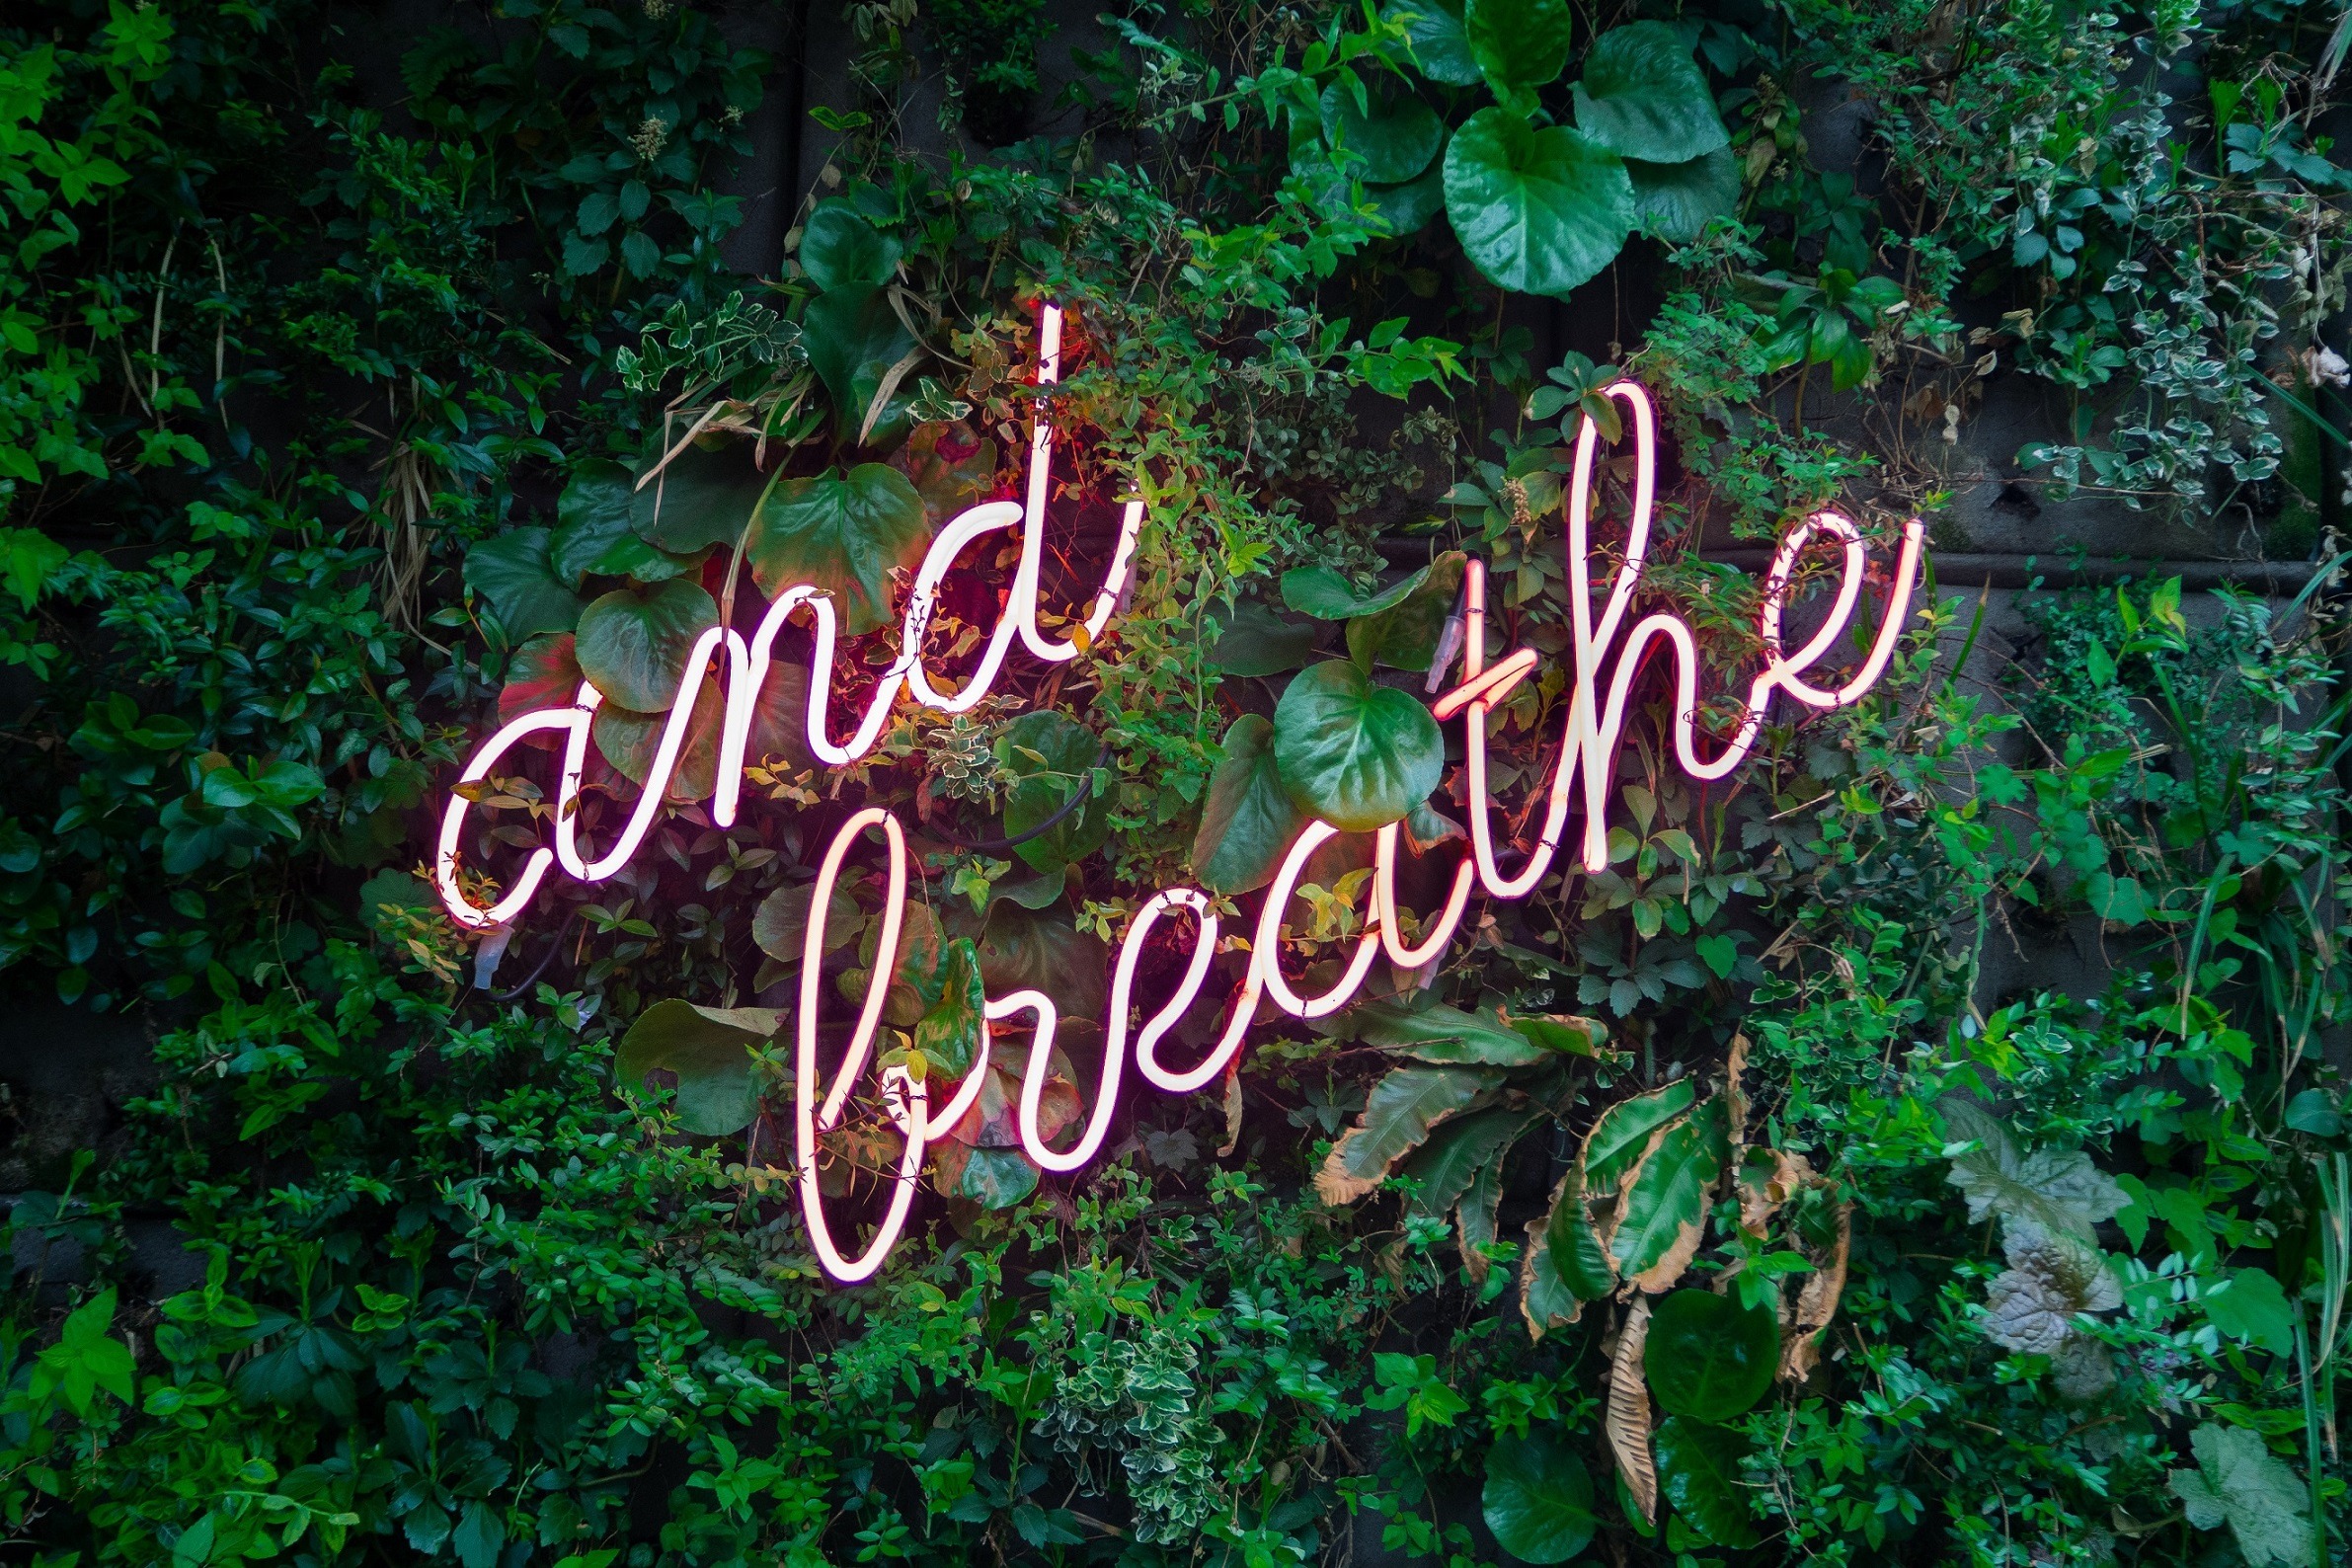 Greenery with a neon sign on top, stating "and breathe"